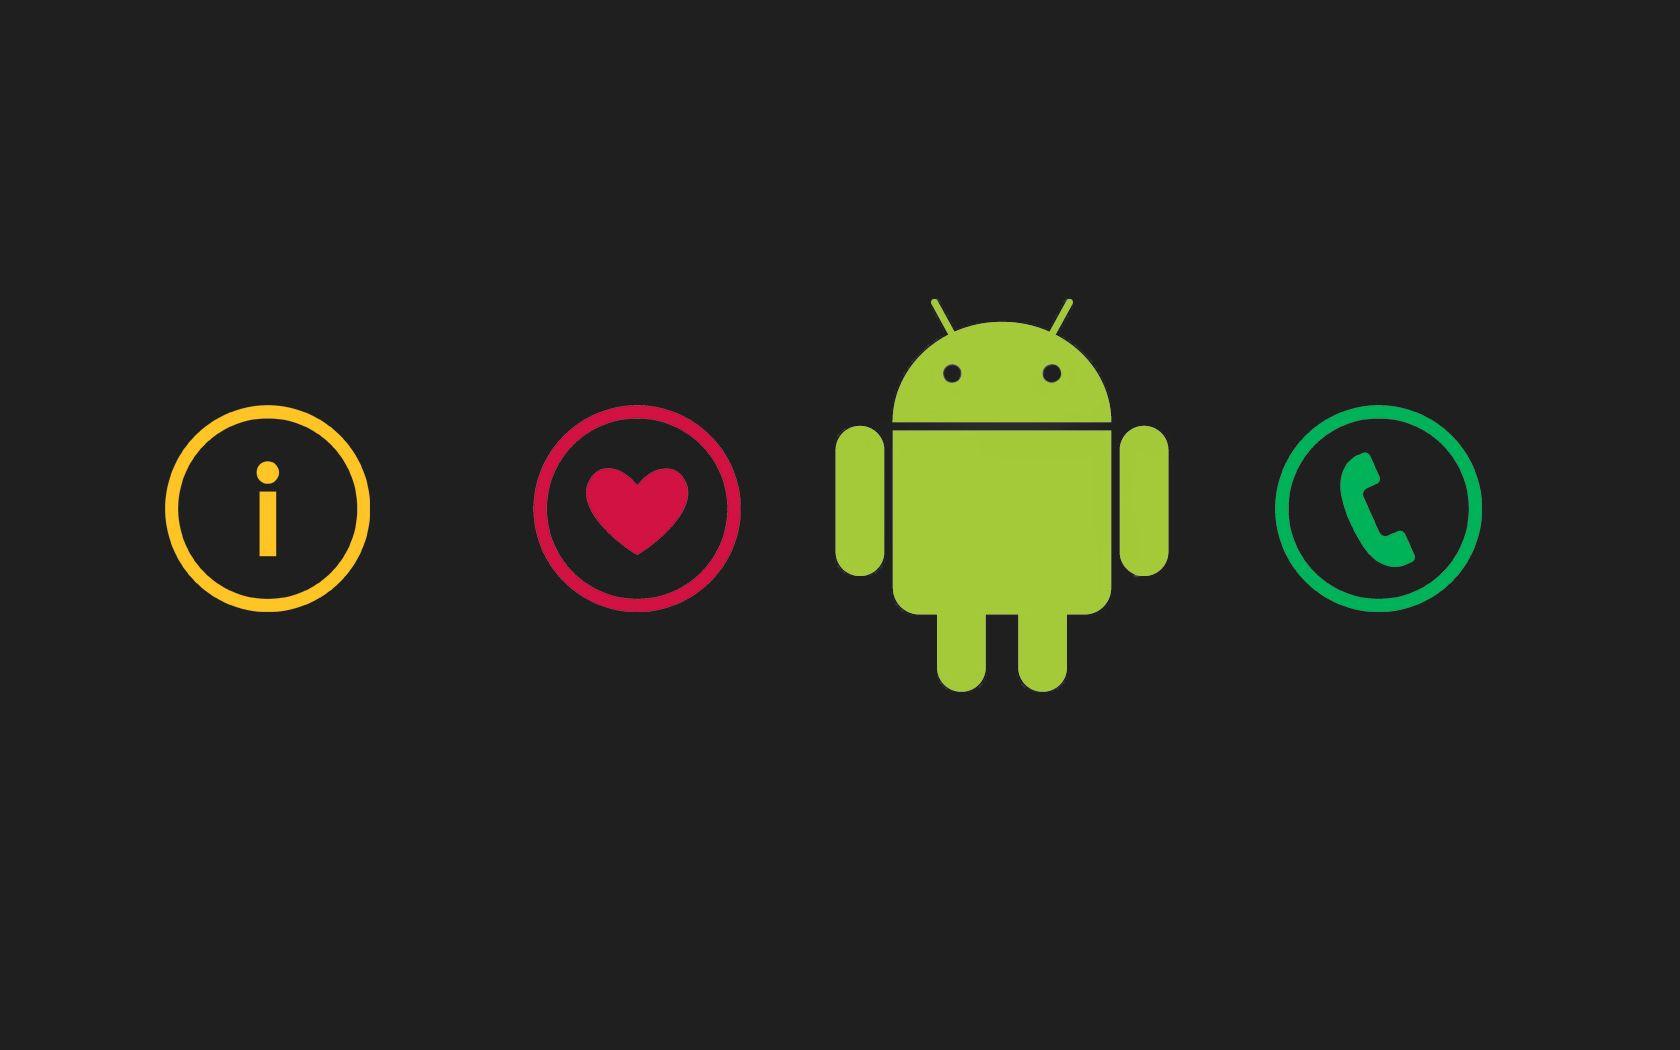 For Programmers, Android Programming HD phone wallpaper